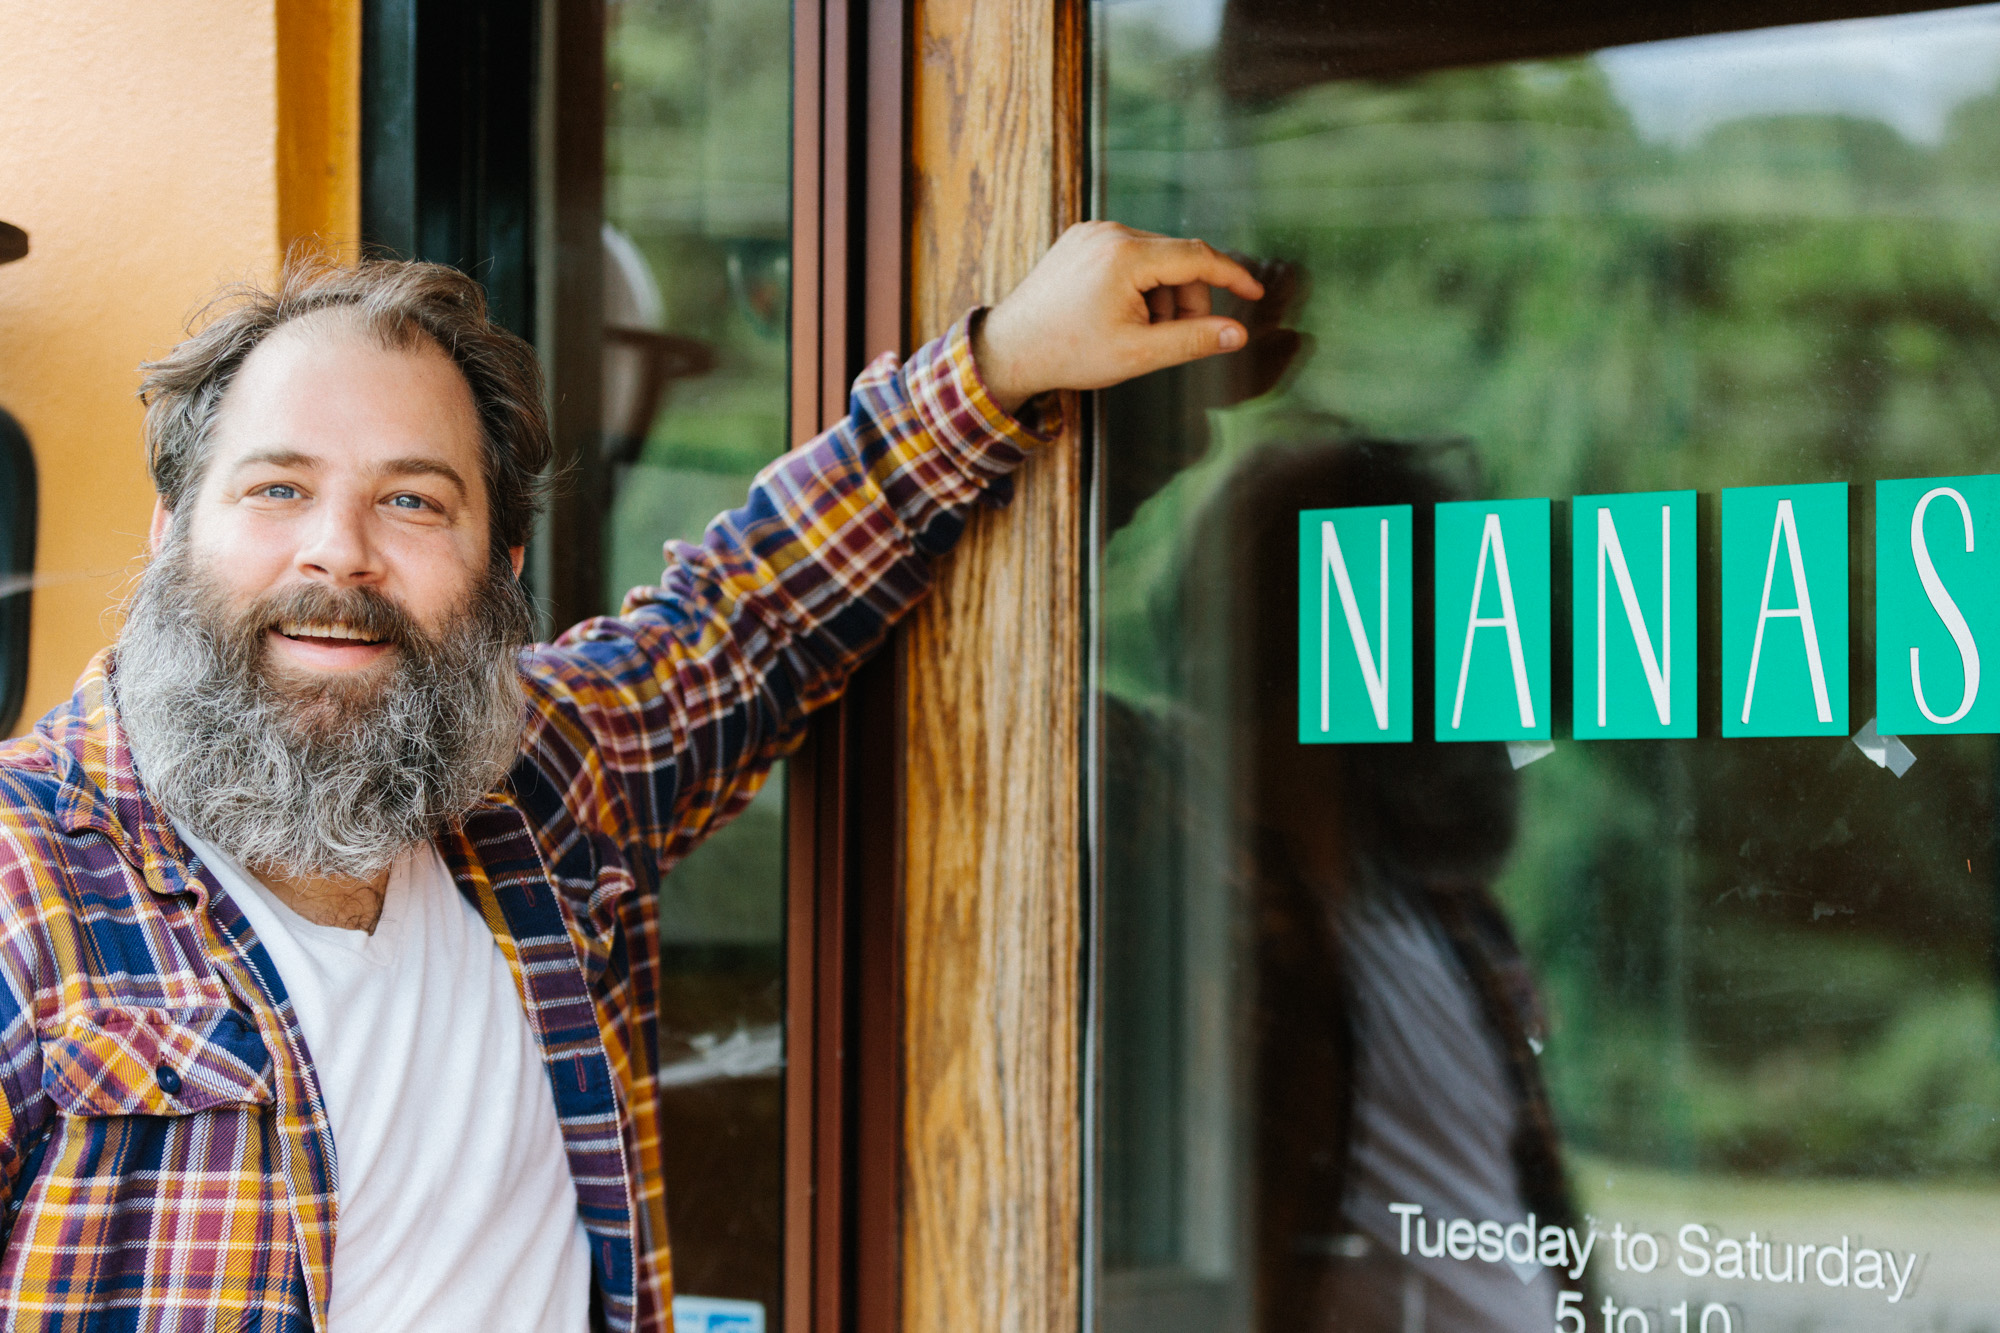 A white man with a beard leaning against a glass door that reads “Nana’s.”